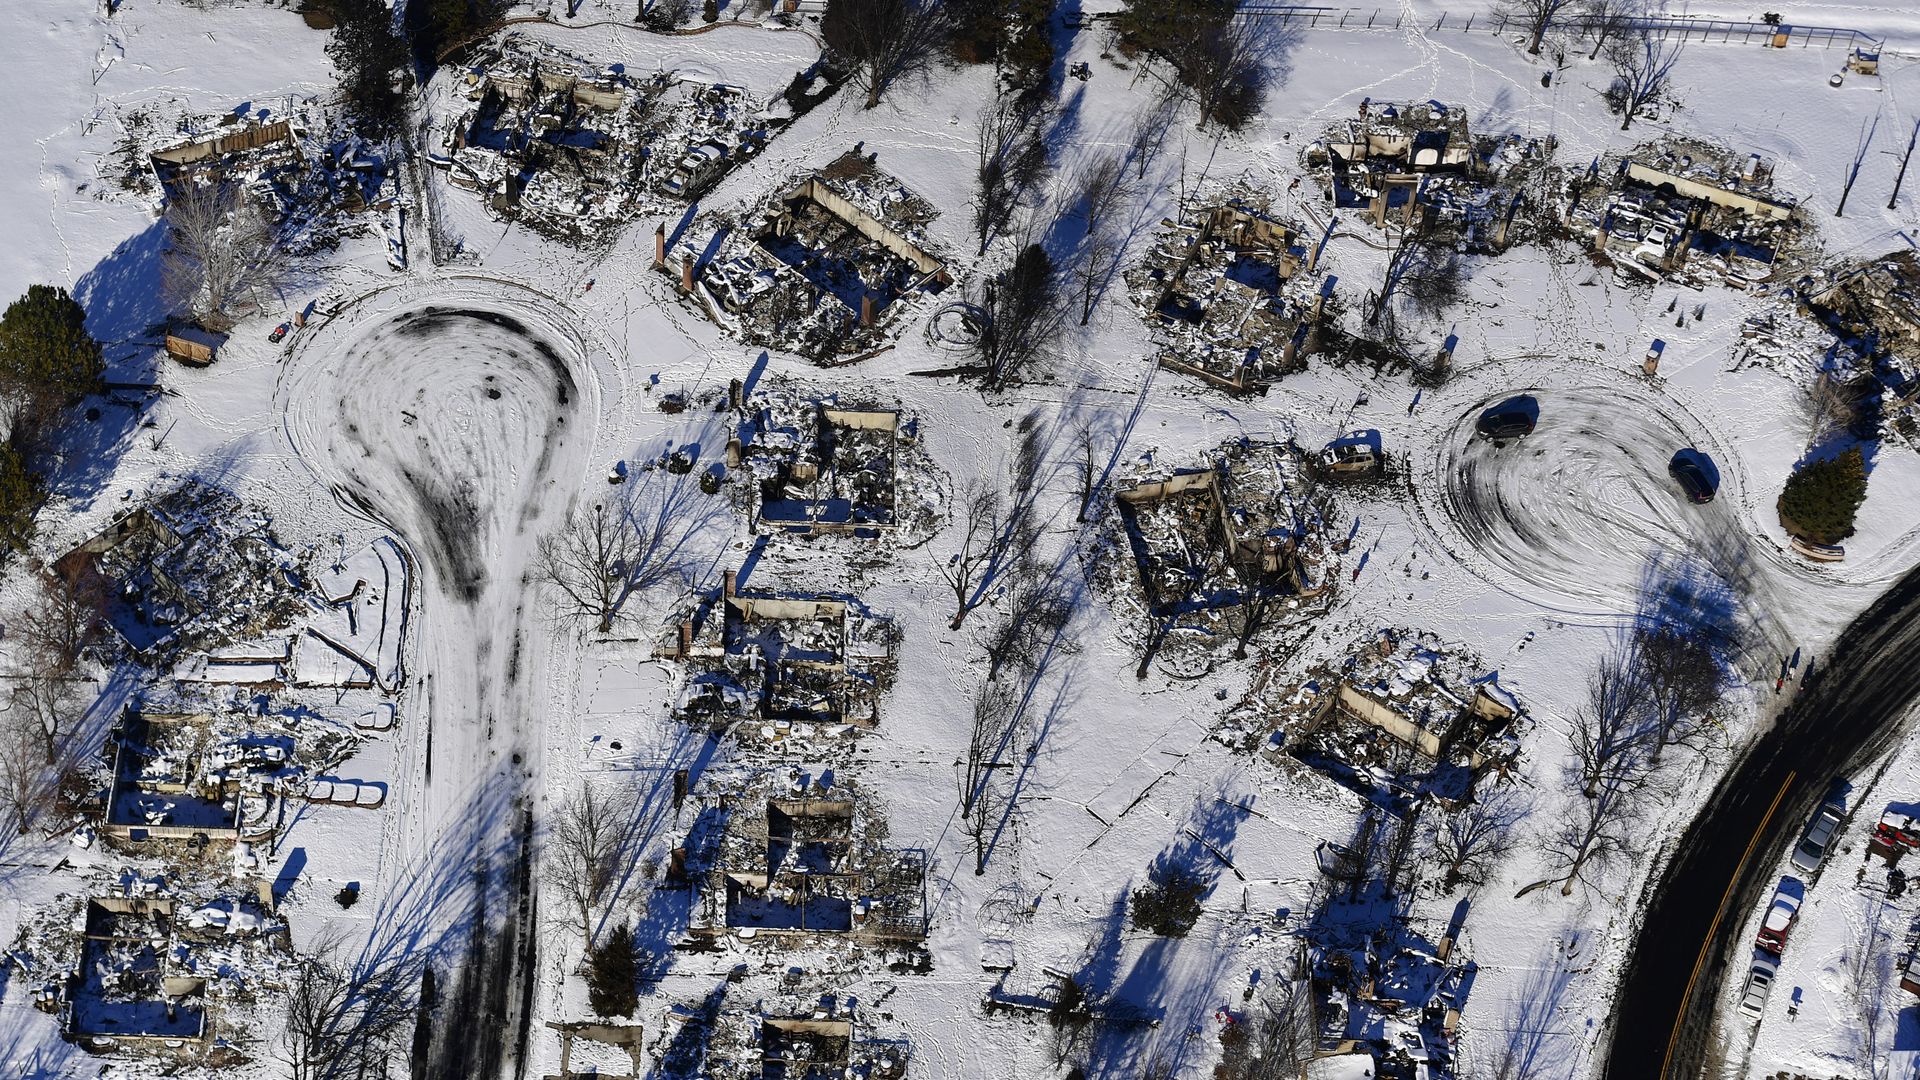 Aerial photos of the devastated neighborhoods left behind from the Marshall Fire in Louisville. Photo: Helen H. Richardson/Denver Post via Getty Images